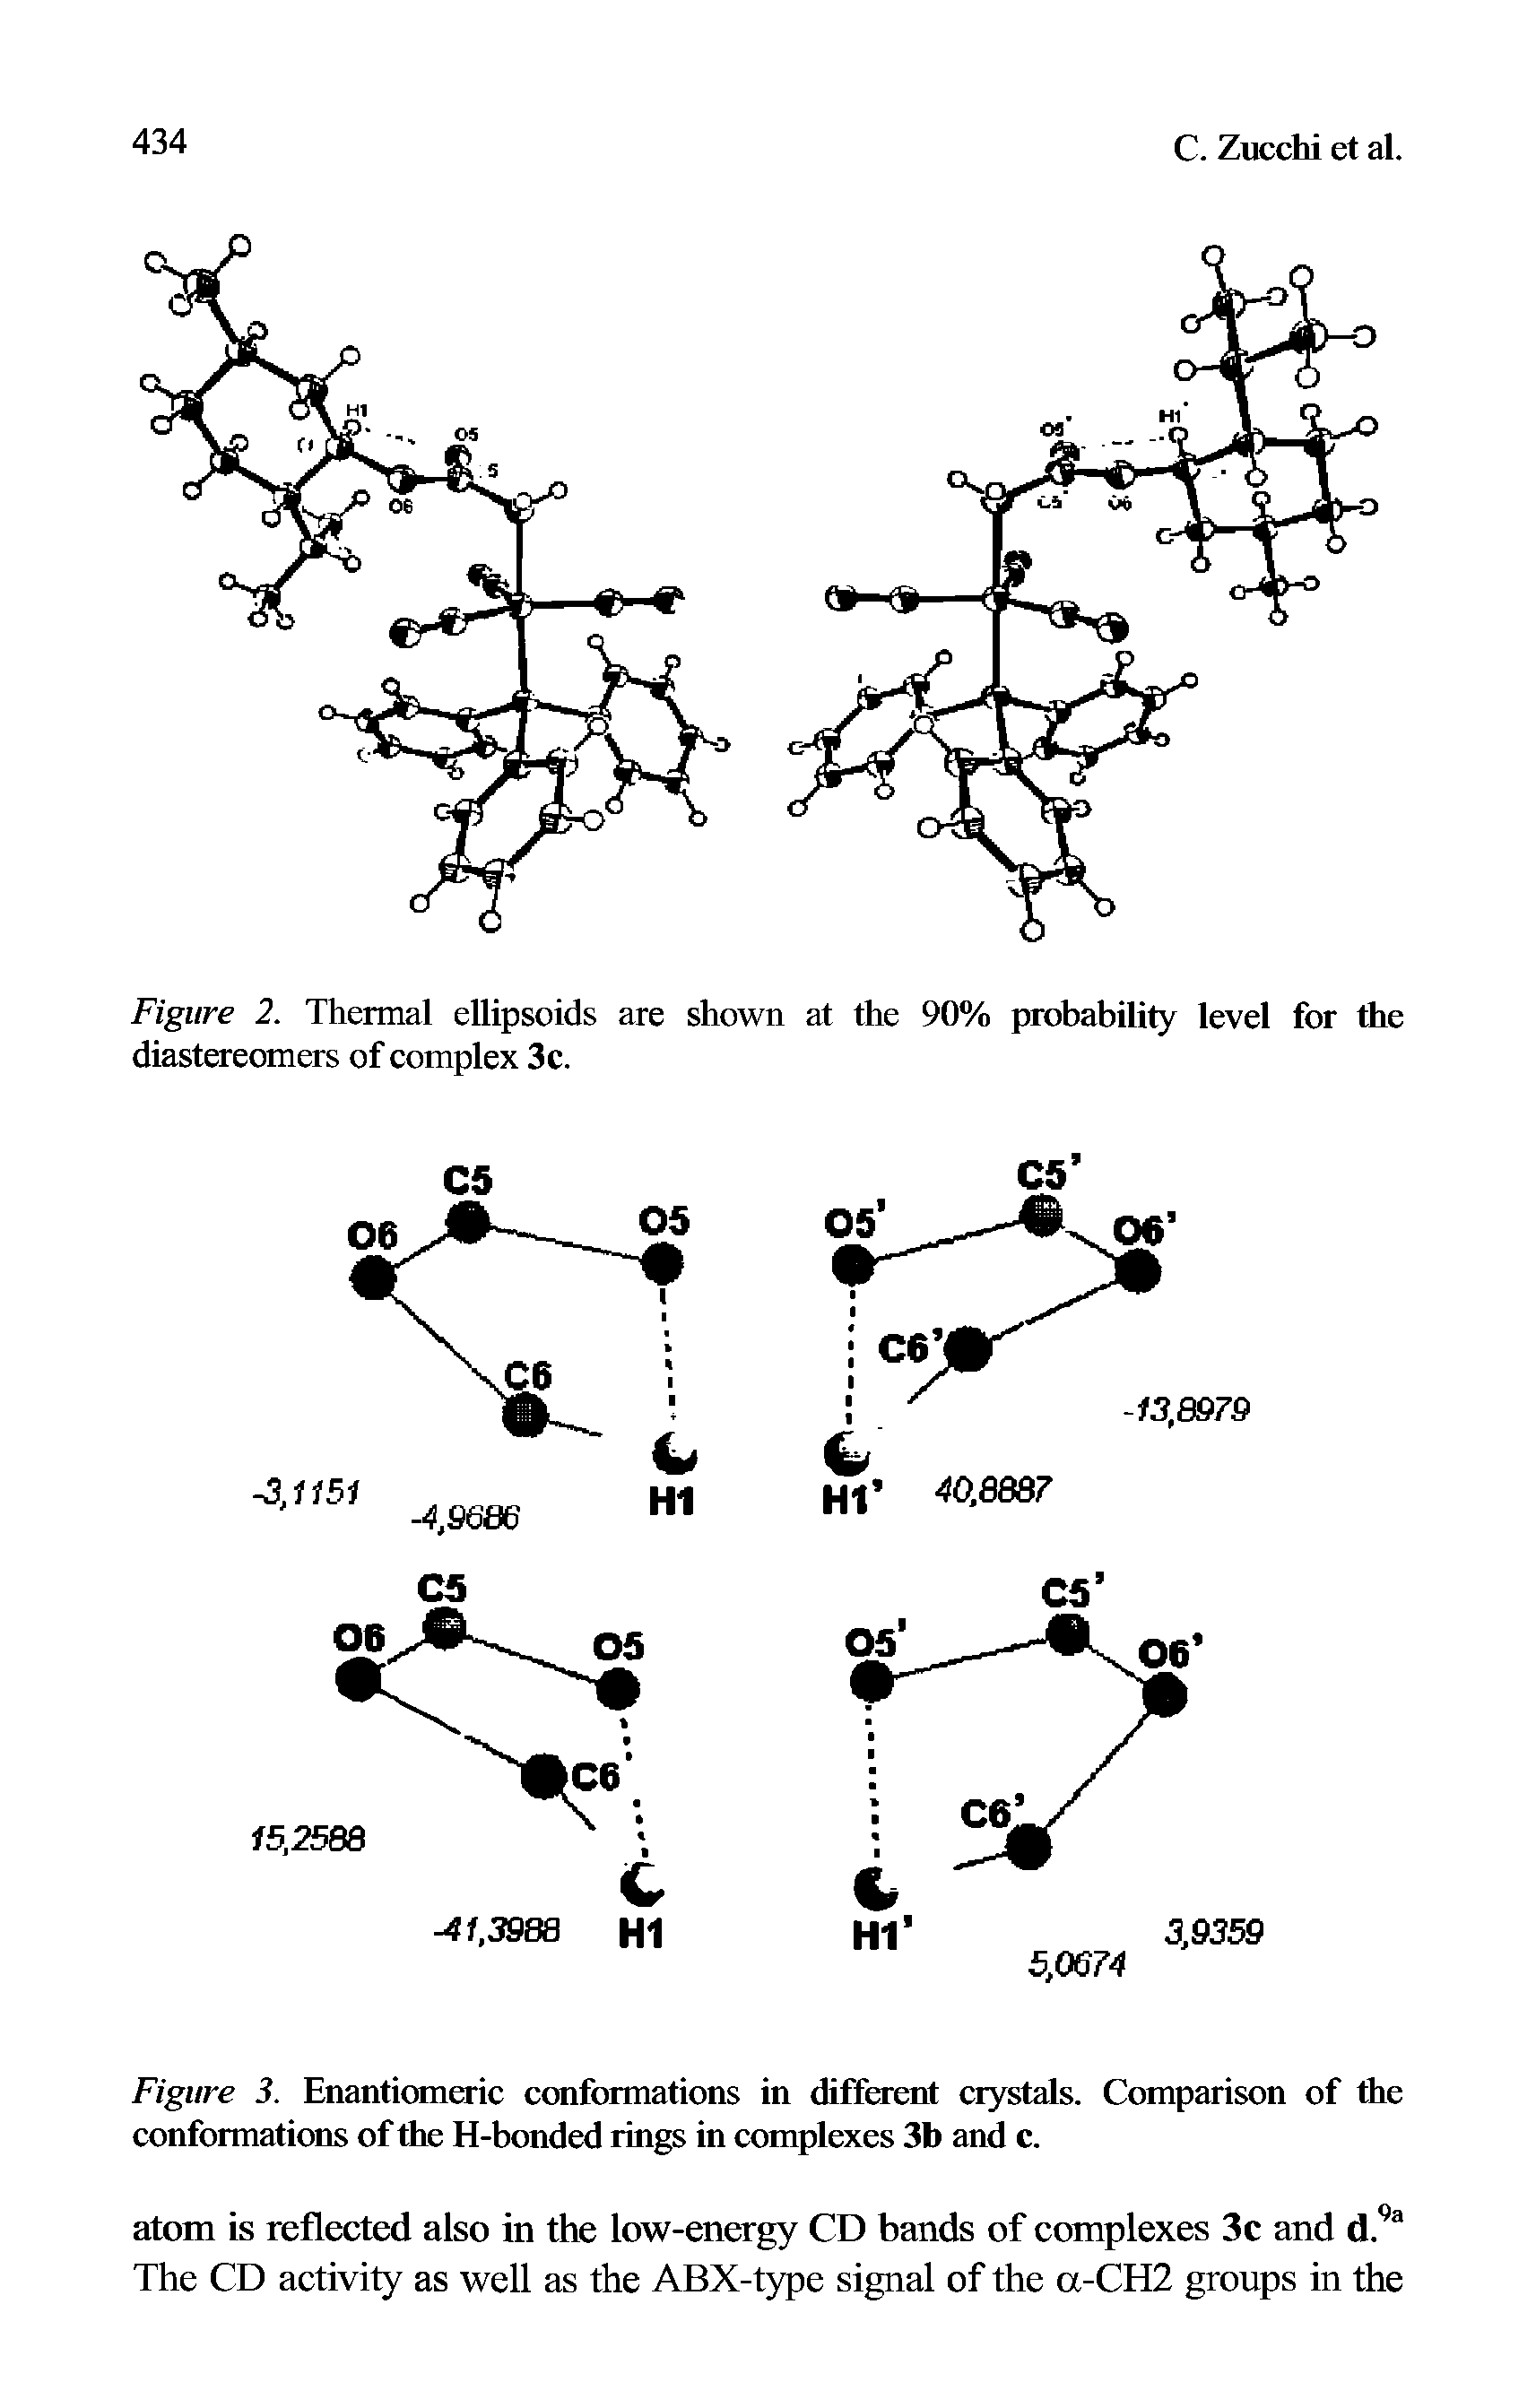 Figure 3. Enantiomeric conformations in different crystals. Comparison of the conformations of the H-bonded rings in complexes 3b and c.